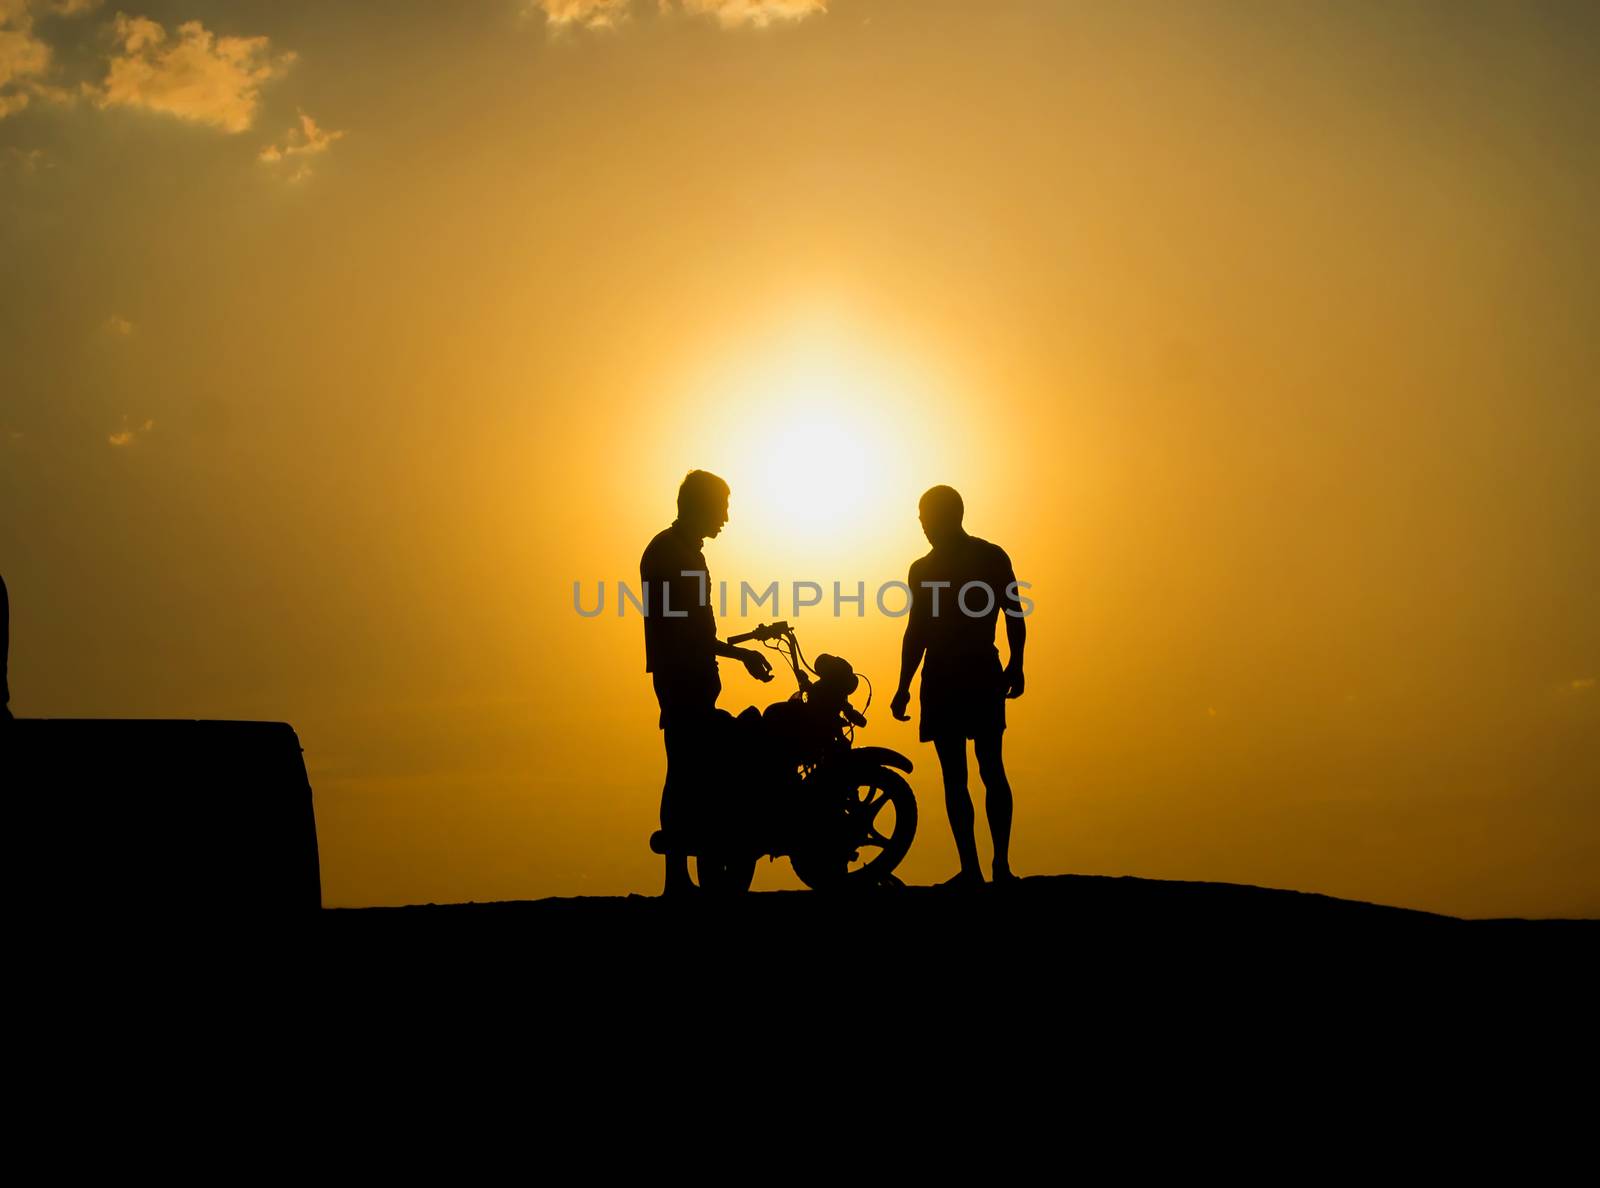 Silhouette of a motorcyclist on a background of dark sky. For your commercial and editorial use.